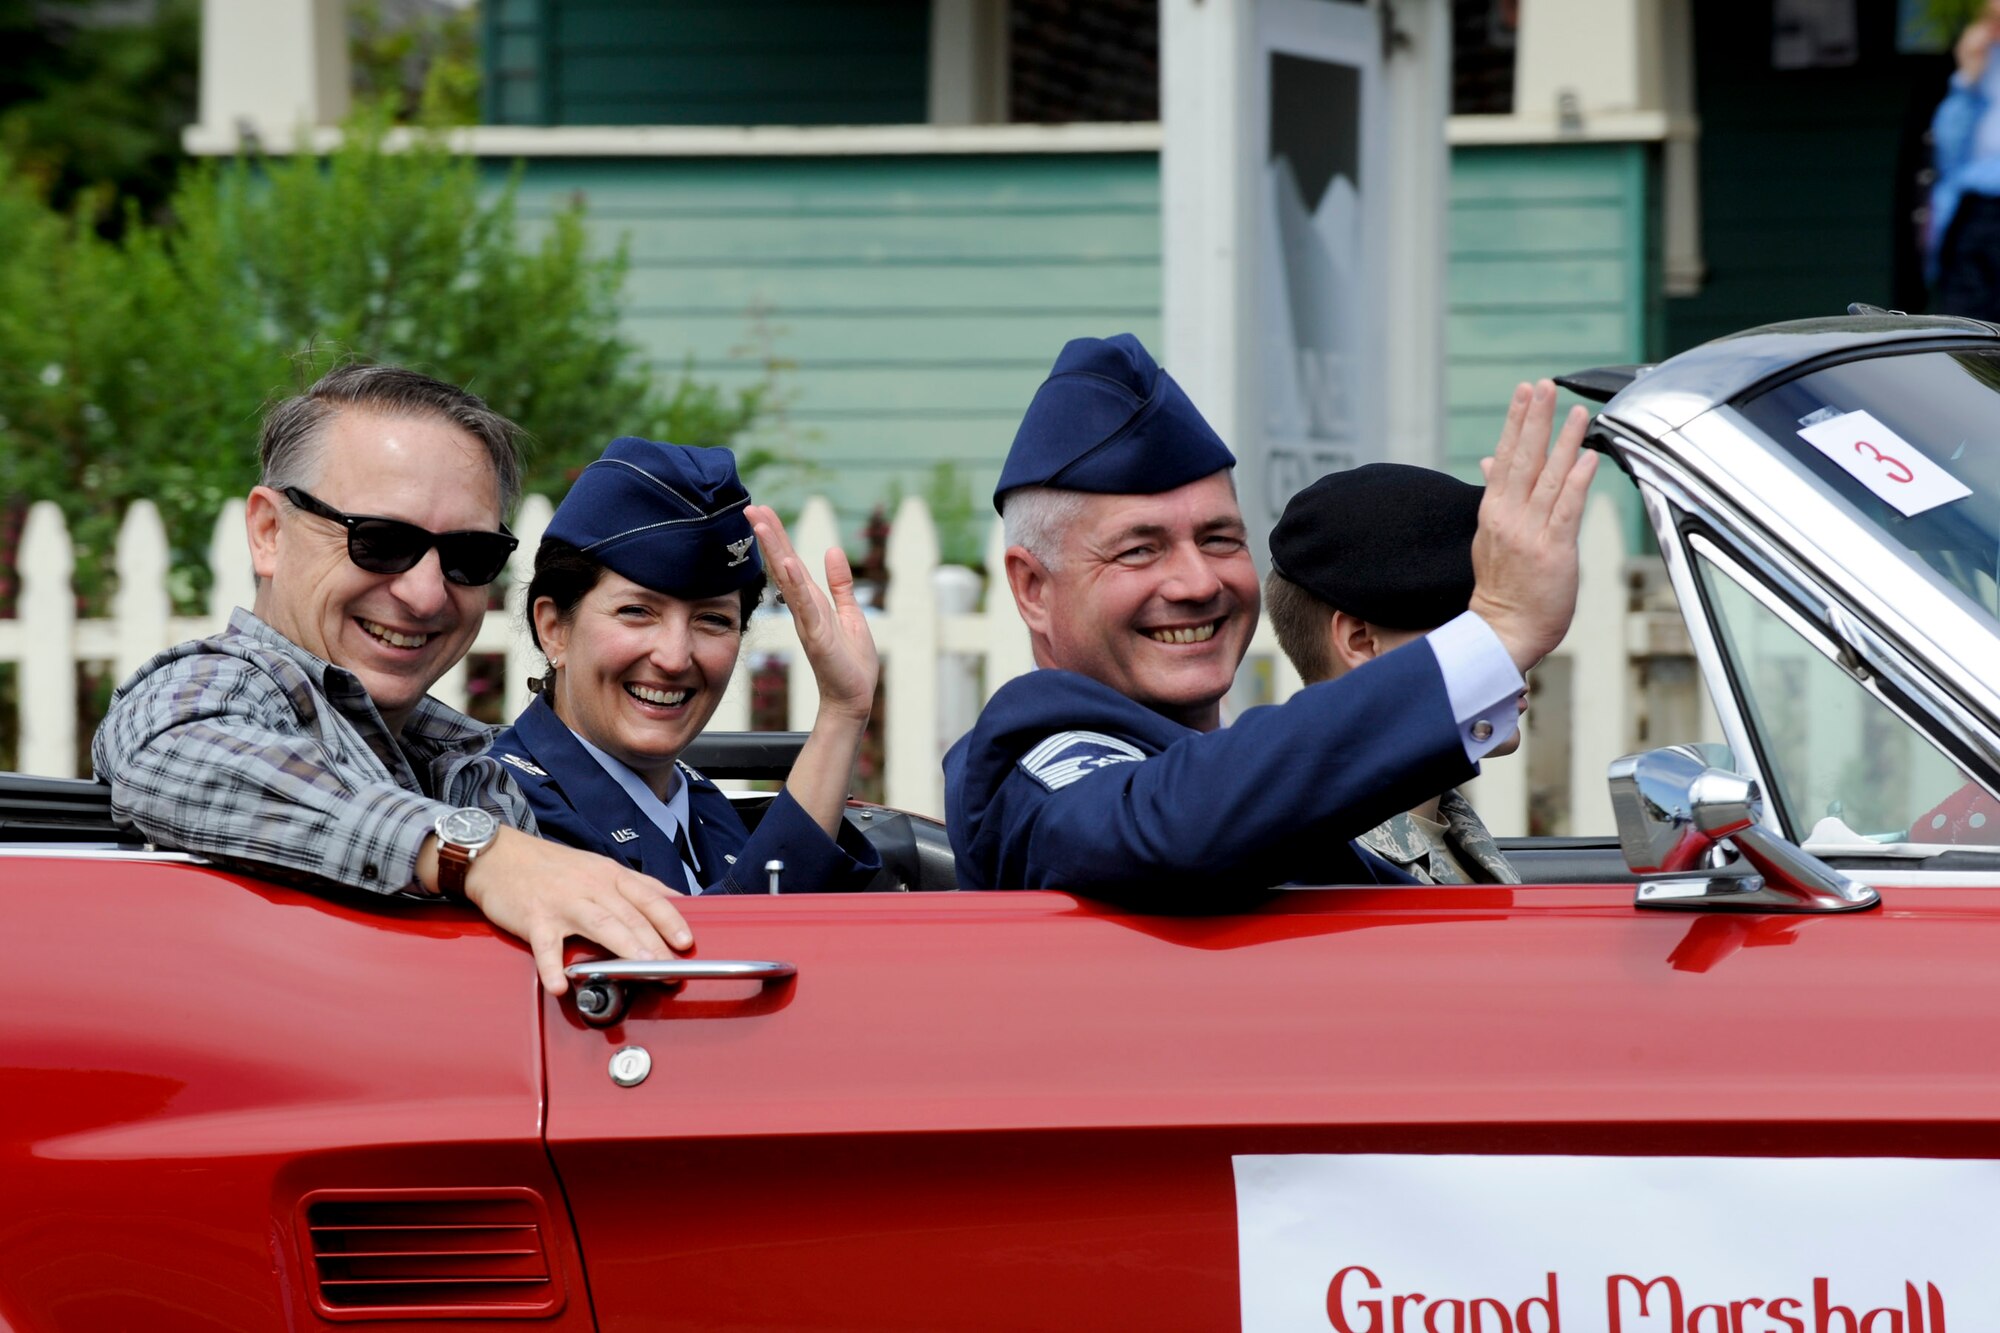 VANDENBERG AIR FORCE BASE, Calif. -- Col. Nina Armagno, center, 30th Space Wing commander, her husband Eddie Papczun, left, and Chief Master Sgt. Patrick Abbott, 30th Mission Support Group superintendent, wave to watchers of  the Celebrate Heroes Parade in Guadalupe Saturday, June 30, 2012. The parade was a recognition of active and veteran members of the military and the city of Guadalupe intends to continue that recognition annually. (U.S. Air Force photo/Staff Sgt. Levi Riendeau)
